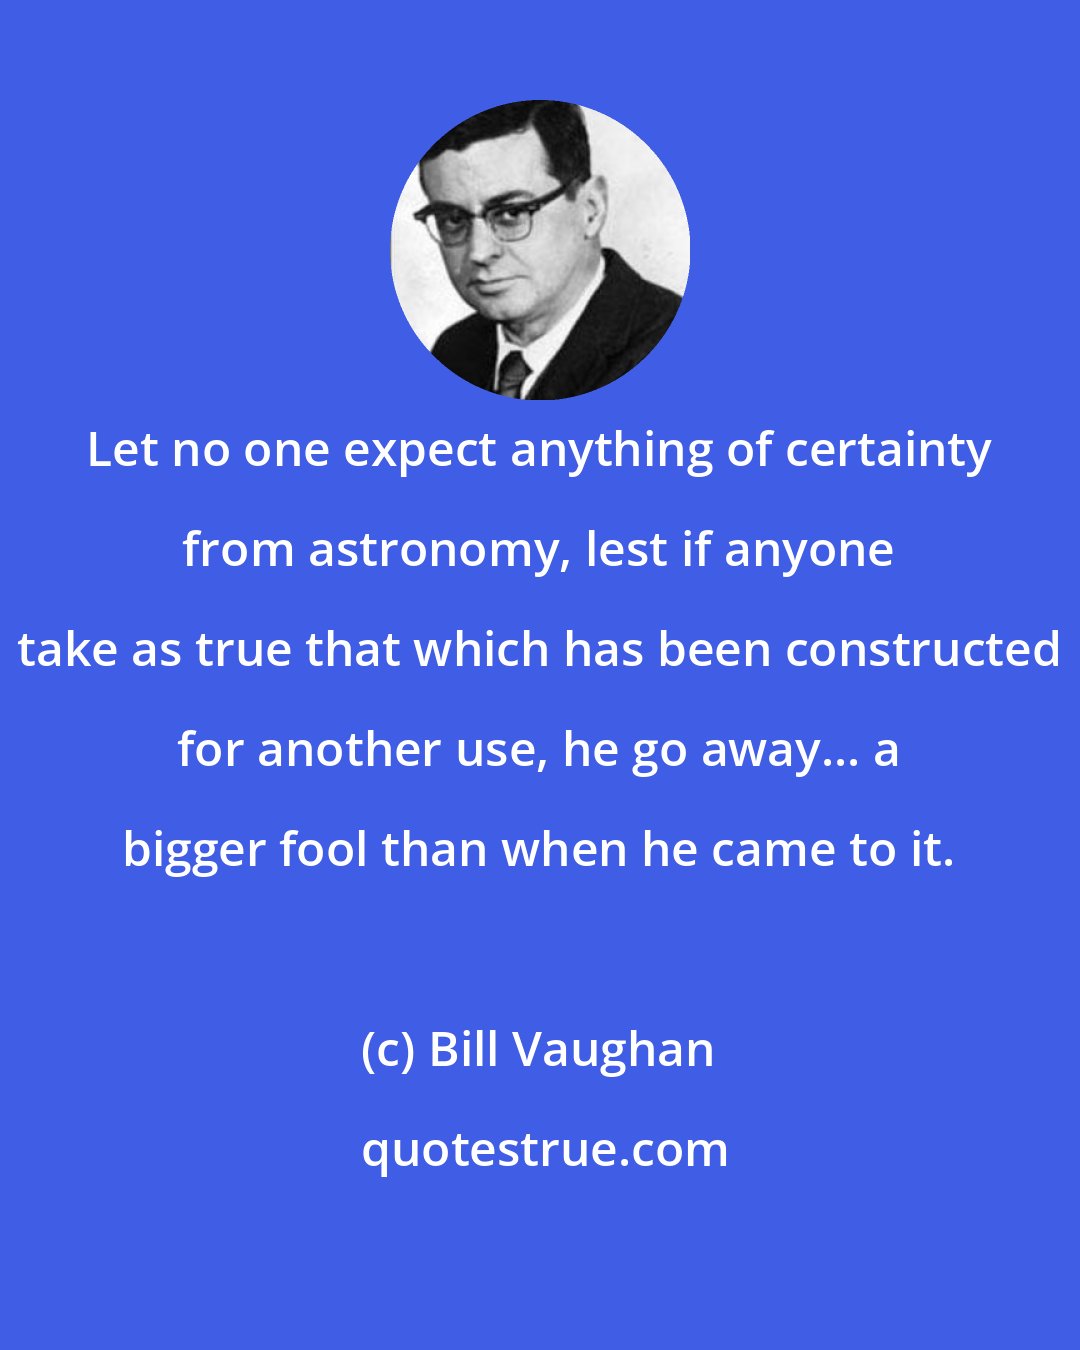 Bill Vaughan: Let no one expect anything of certainty from astronomy, lest if anyone take as true that which has been constructed for another use, he go away... a bigger fool than when he came to it.